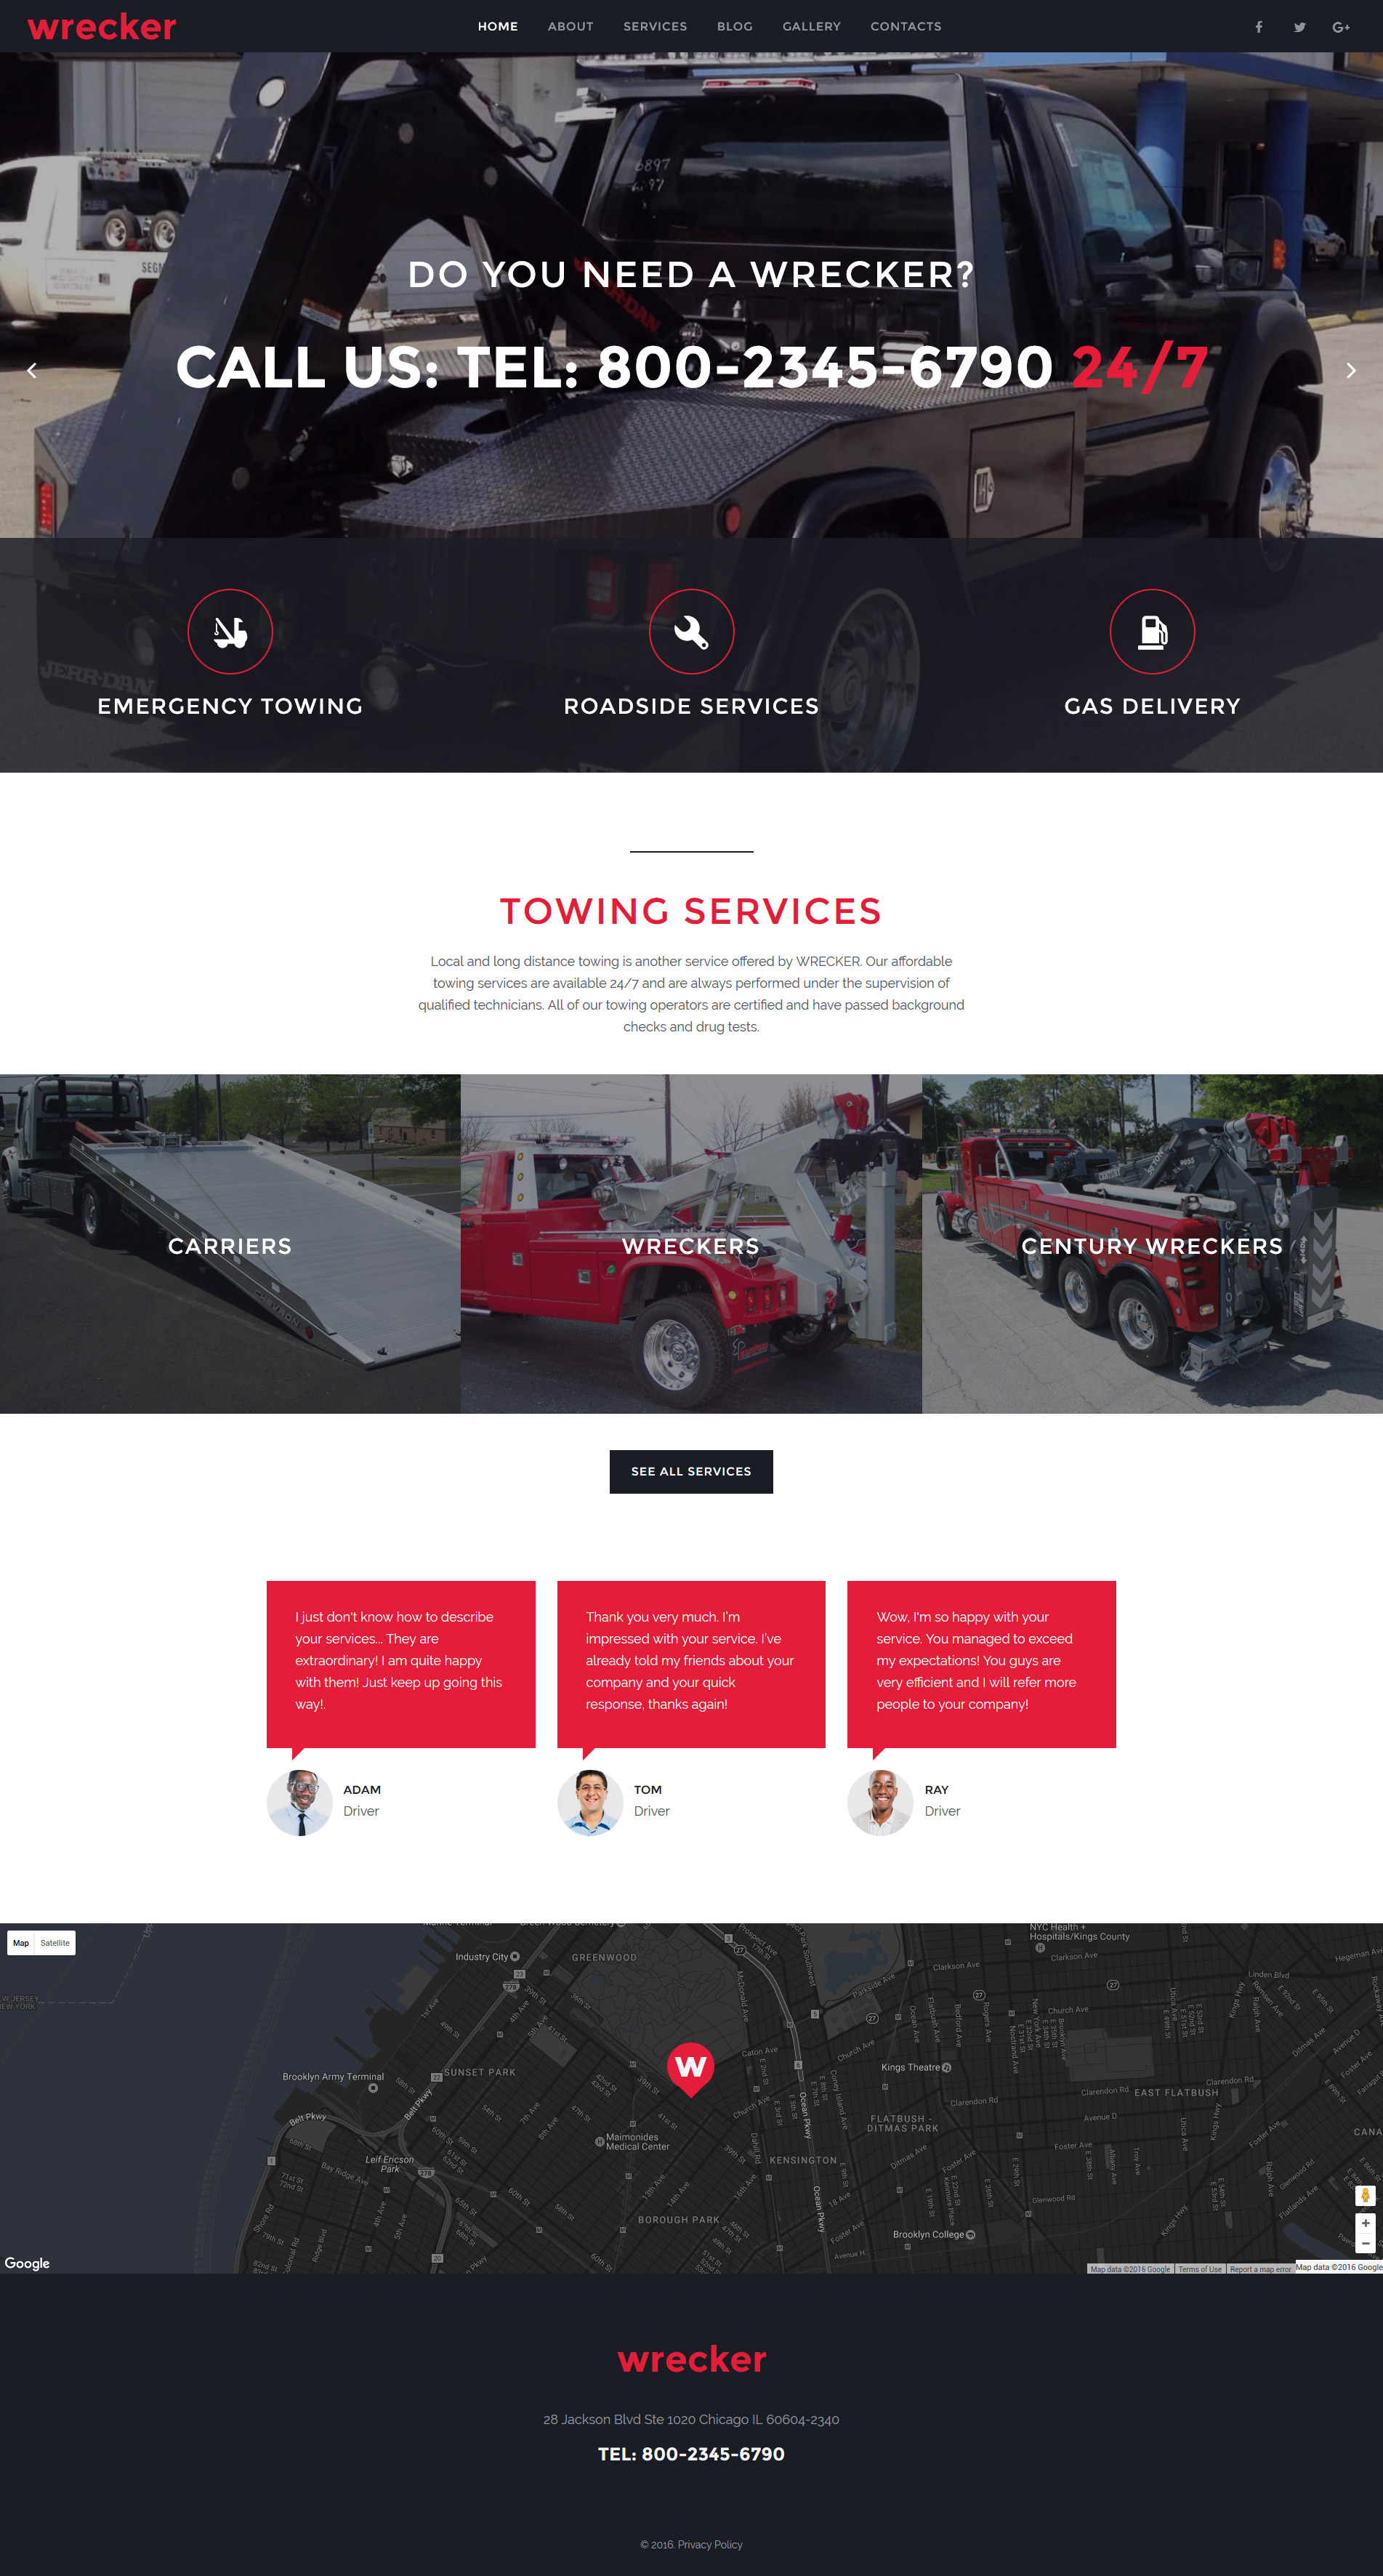 Wrecker - Auto Towing & Roadside Services Website Template